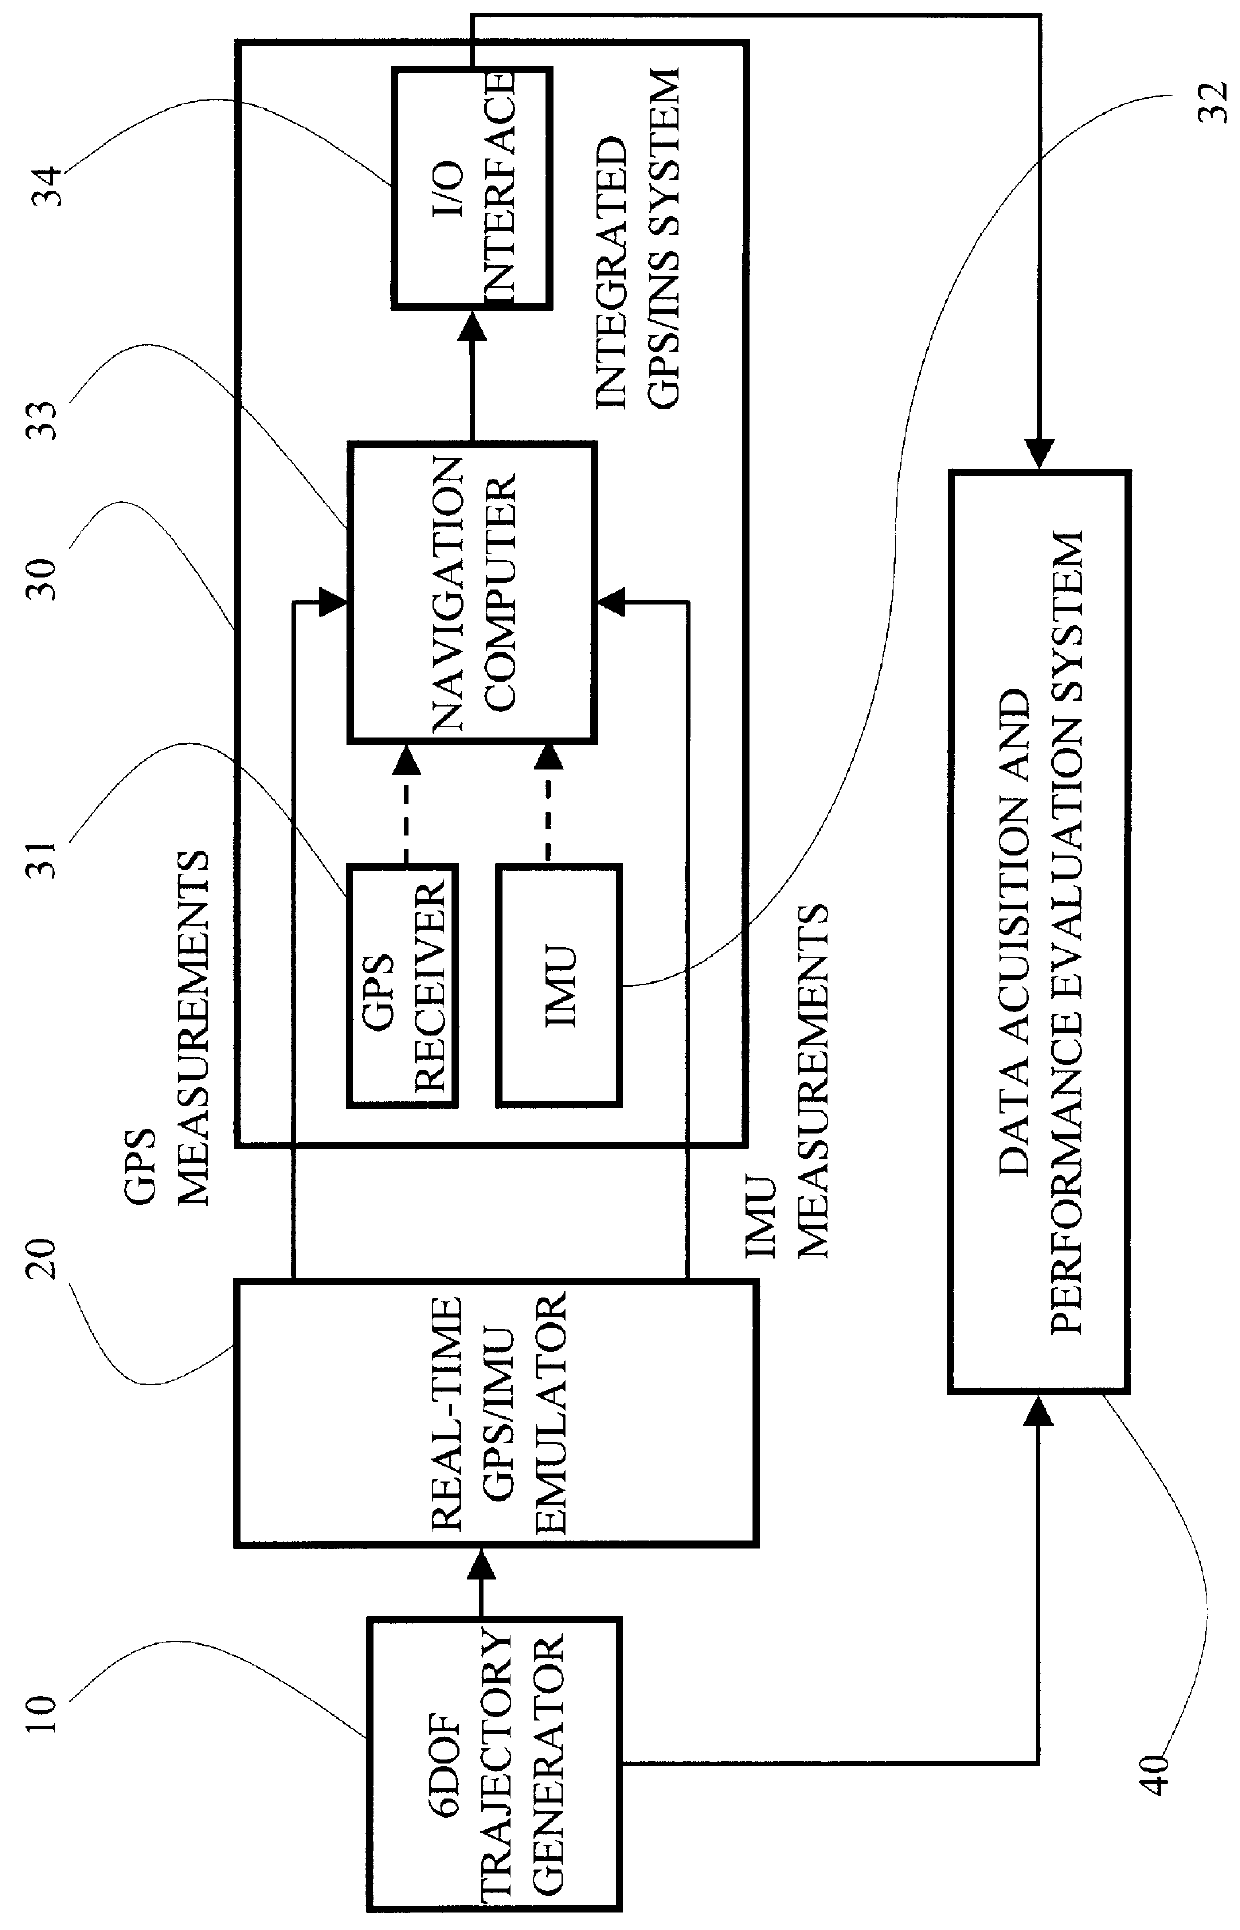 Coupled real time emulation method for positioning and location system